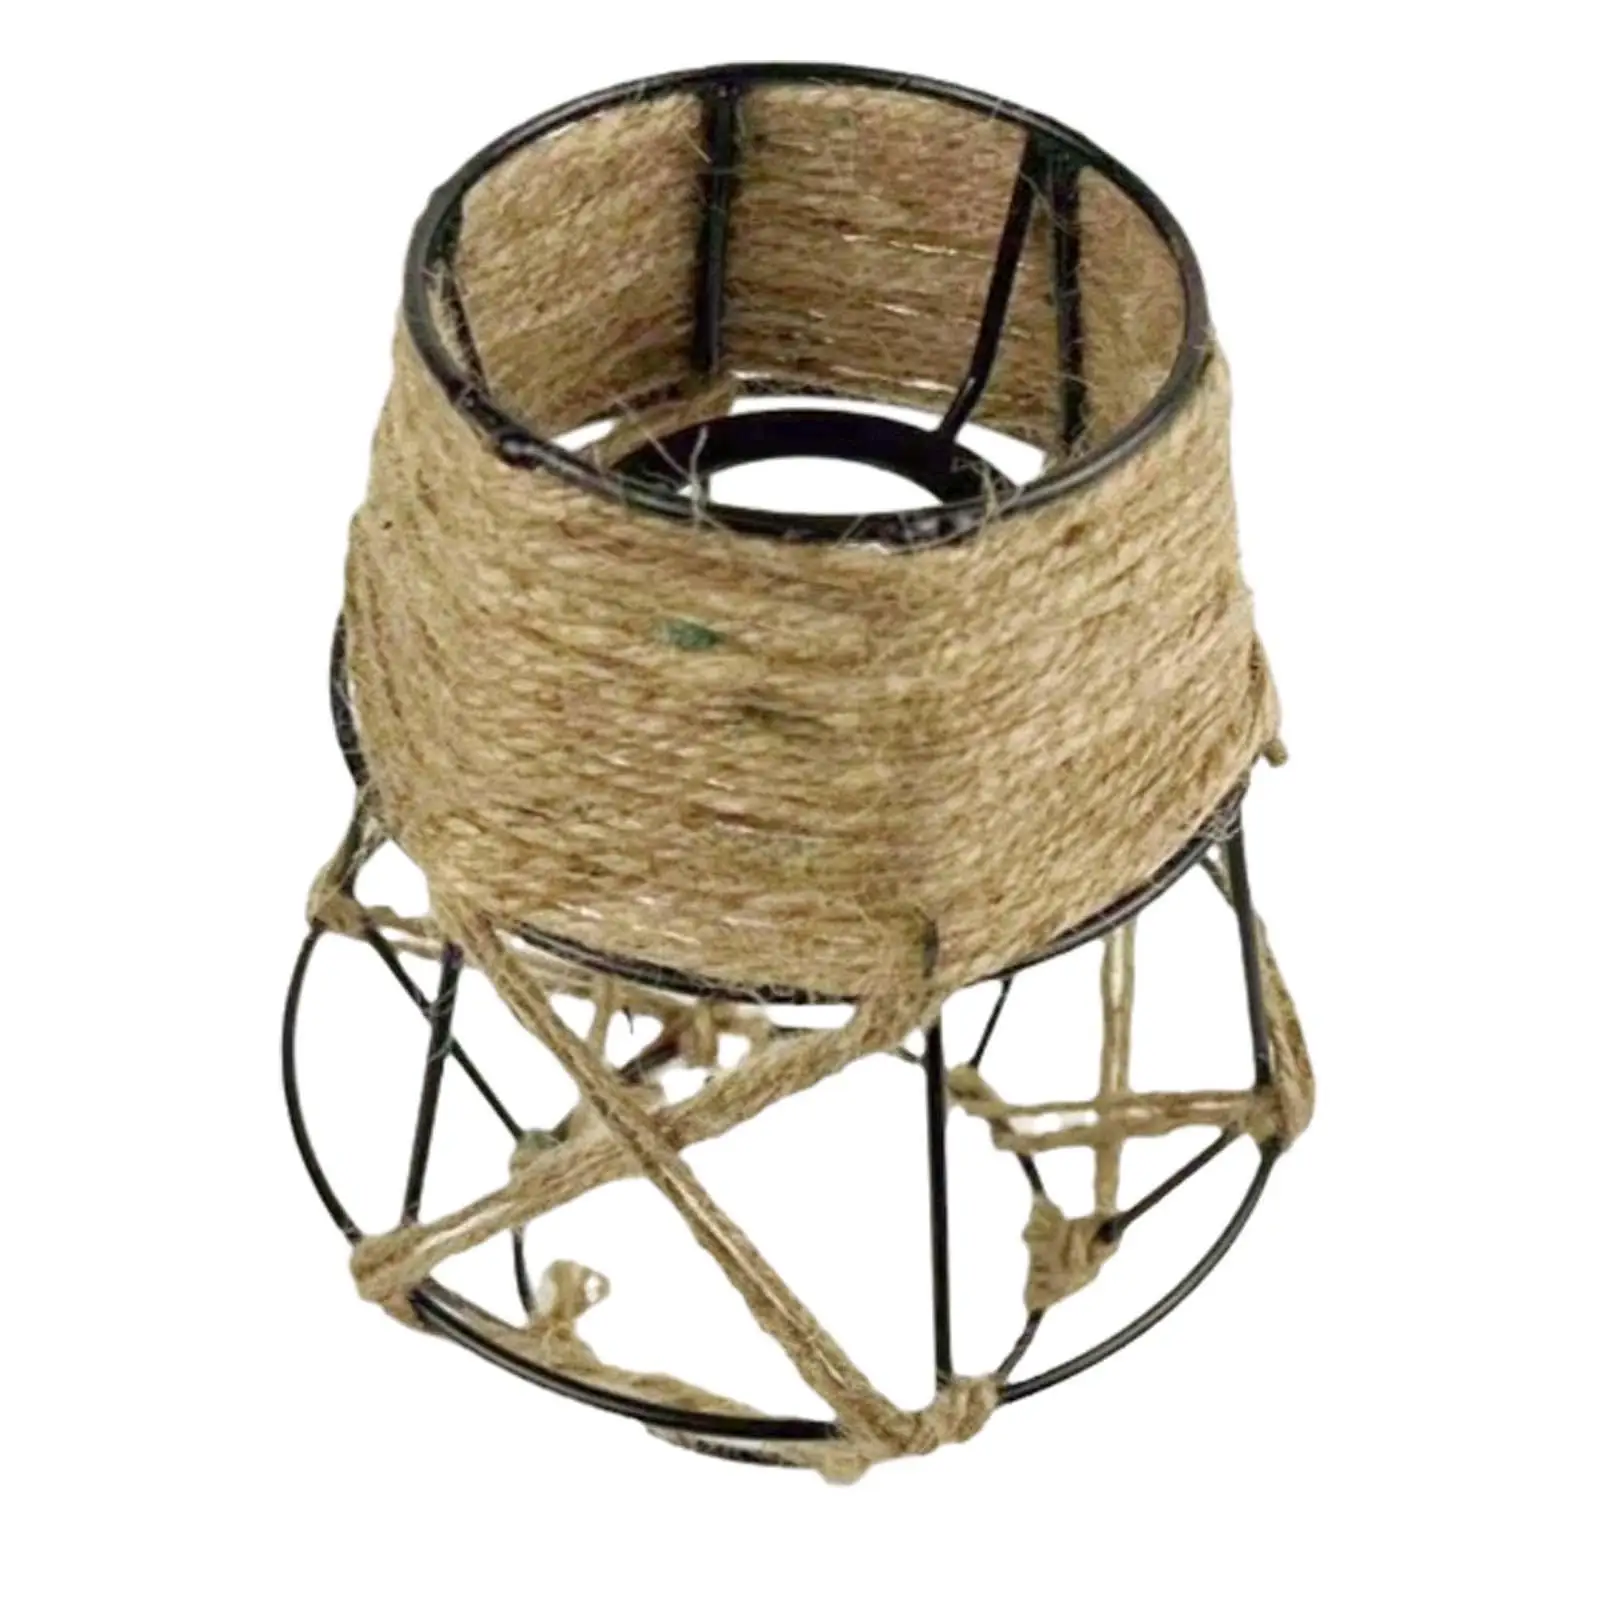 Ceiling Light Fixture Cover Decors Handwoven Rope Lampshade Pendant Lamp Shade for Club Hotel Lantern Kitchen Island Dining Room